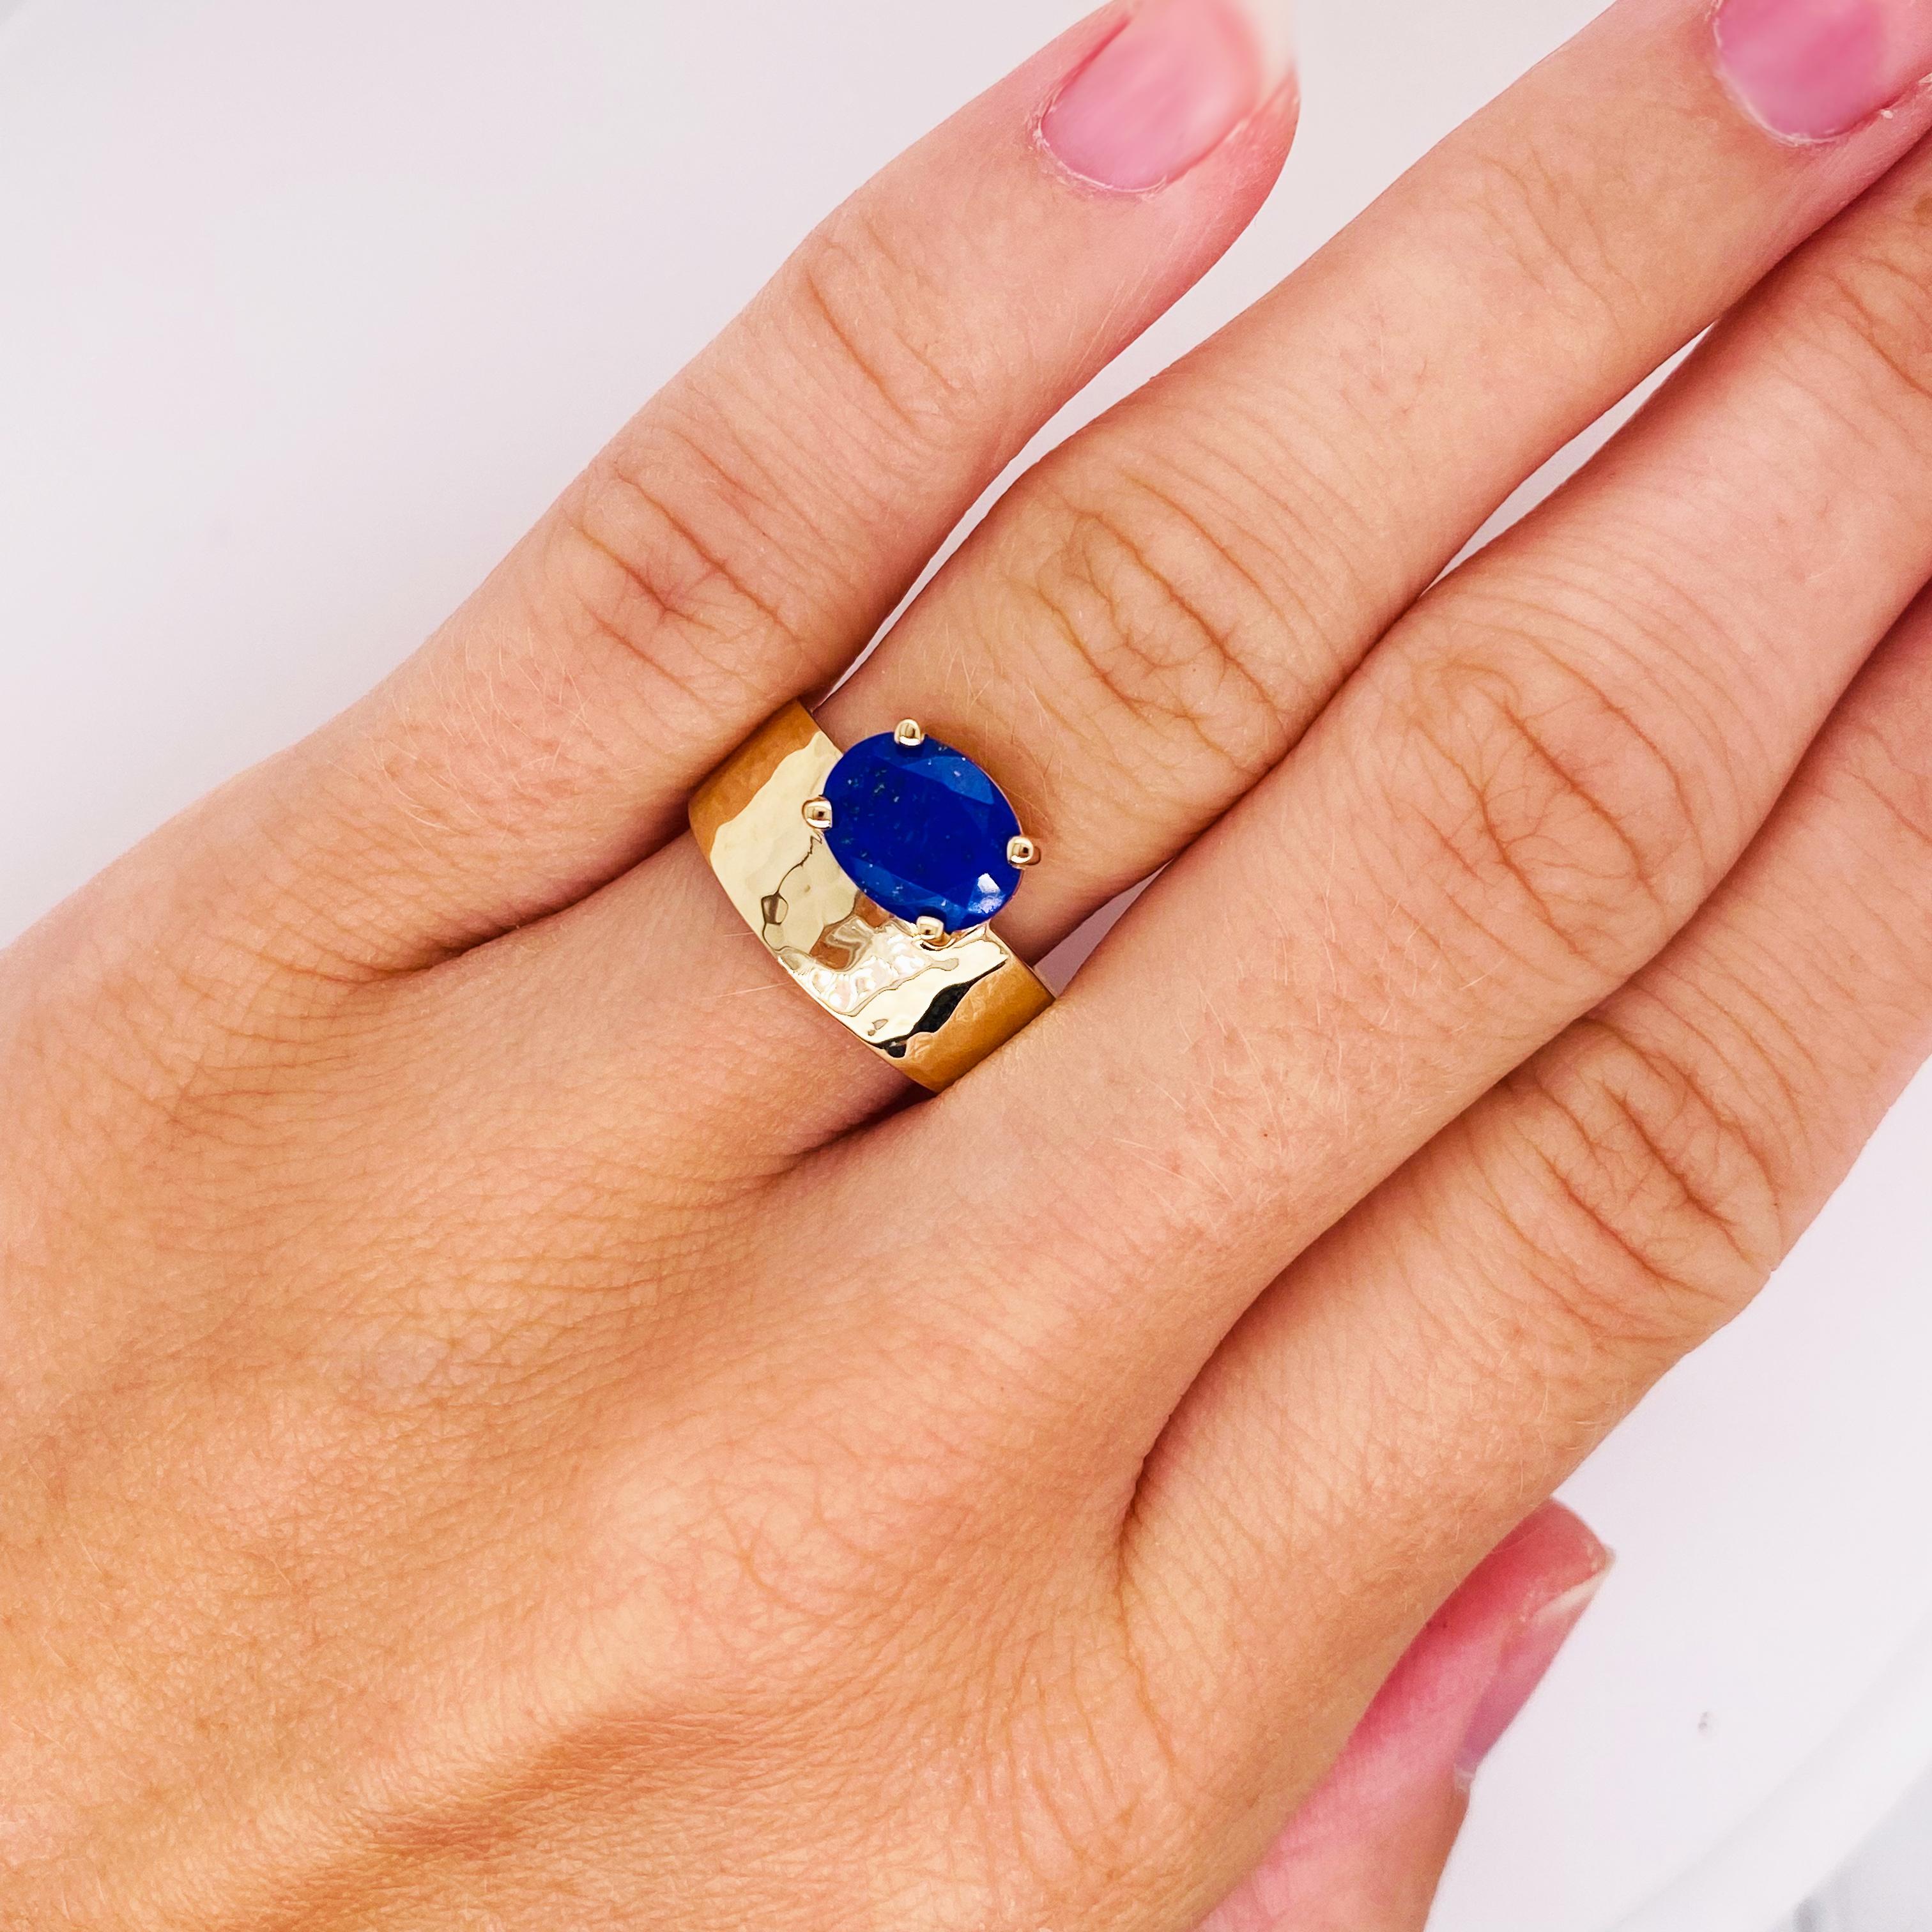 “Azul” is this magnificent blue lapis lazuli ring that was designed by Mary Rupert of Five Star Jewelry in Austin, Texas. She has made a hammered 14 karat yellow gold band  that is iconic with an oval blue lapis lazuli that is faceted and oval